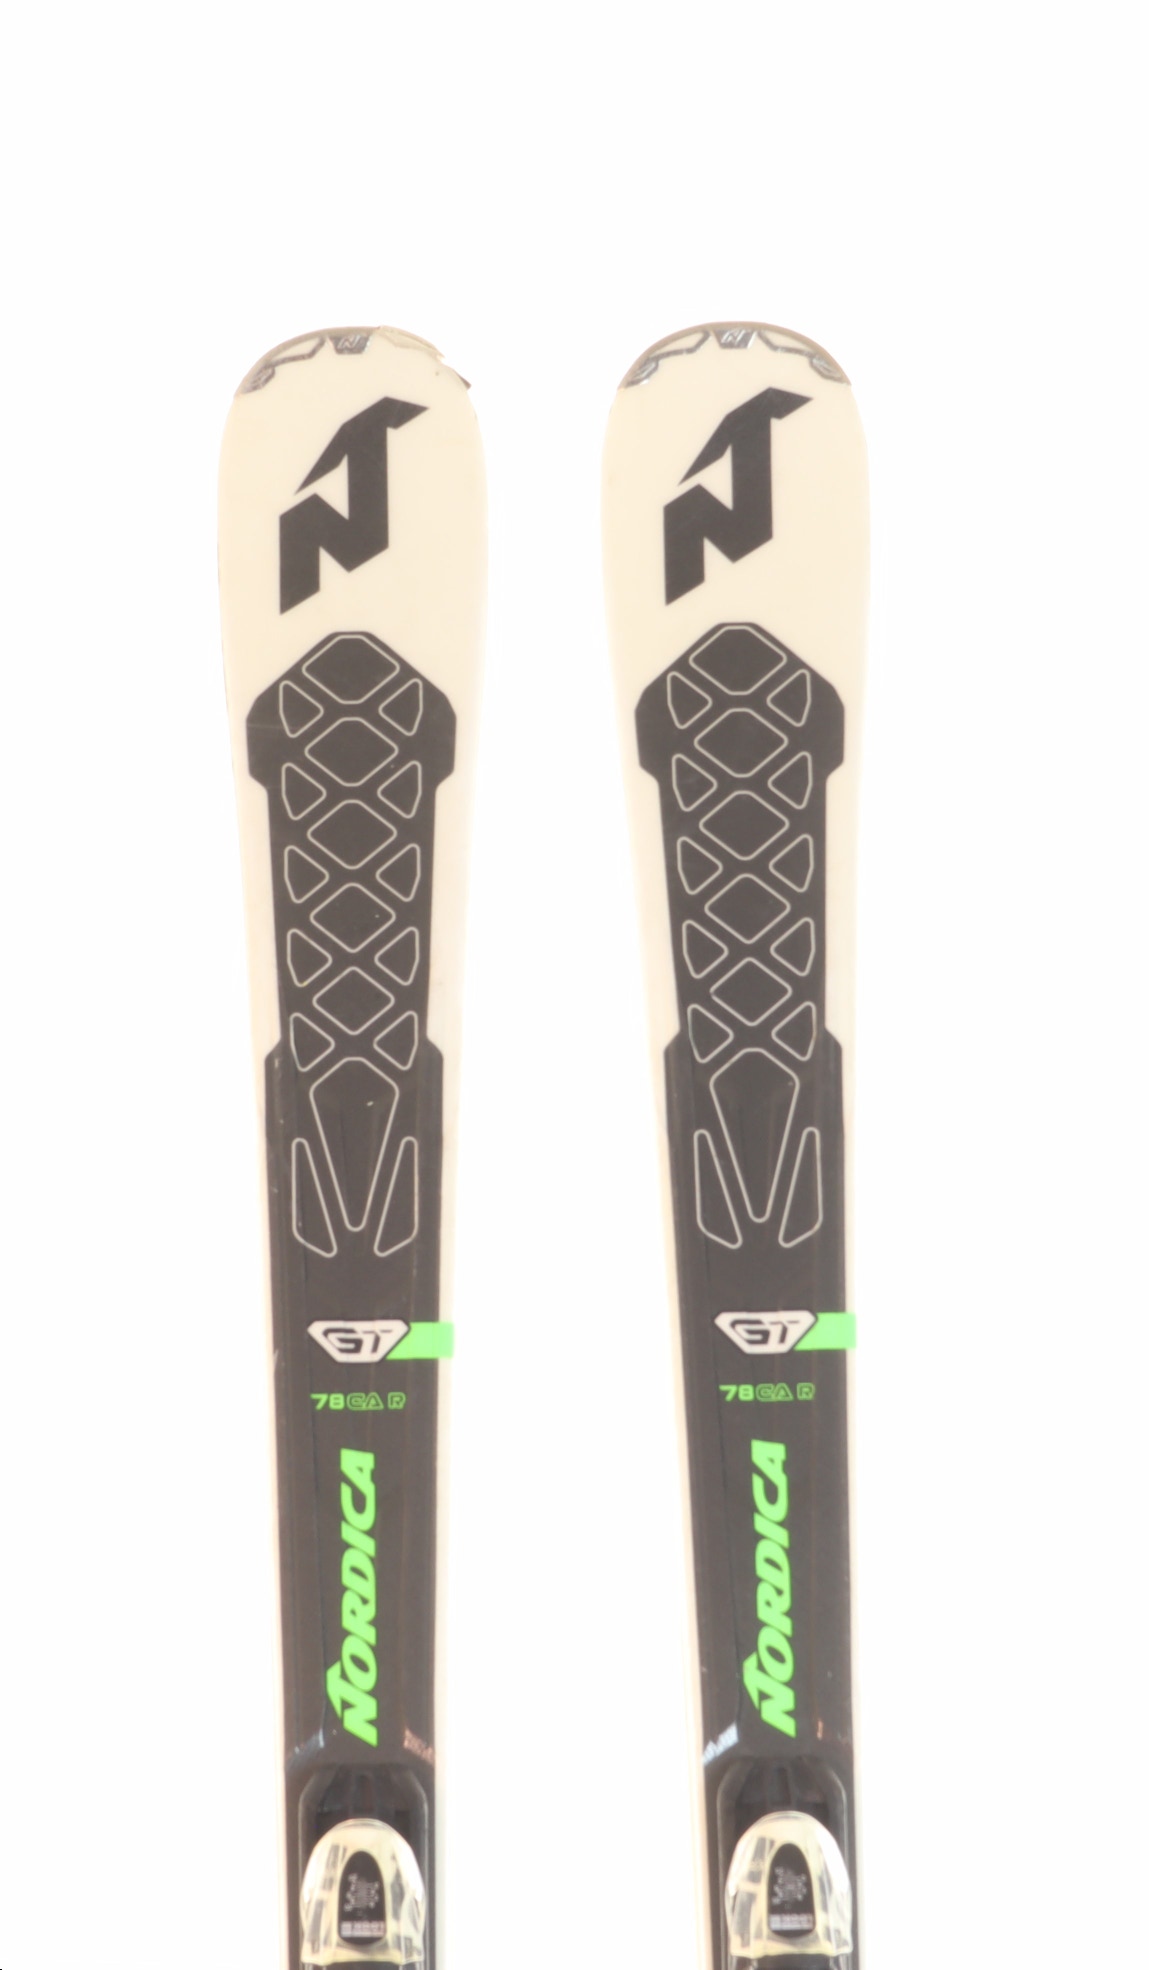 Used 2018 Nordica GT 78CA R Skis With Look Xpress 10 Bindings Size 168 (Option 230495)